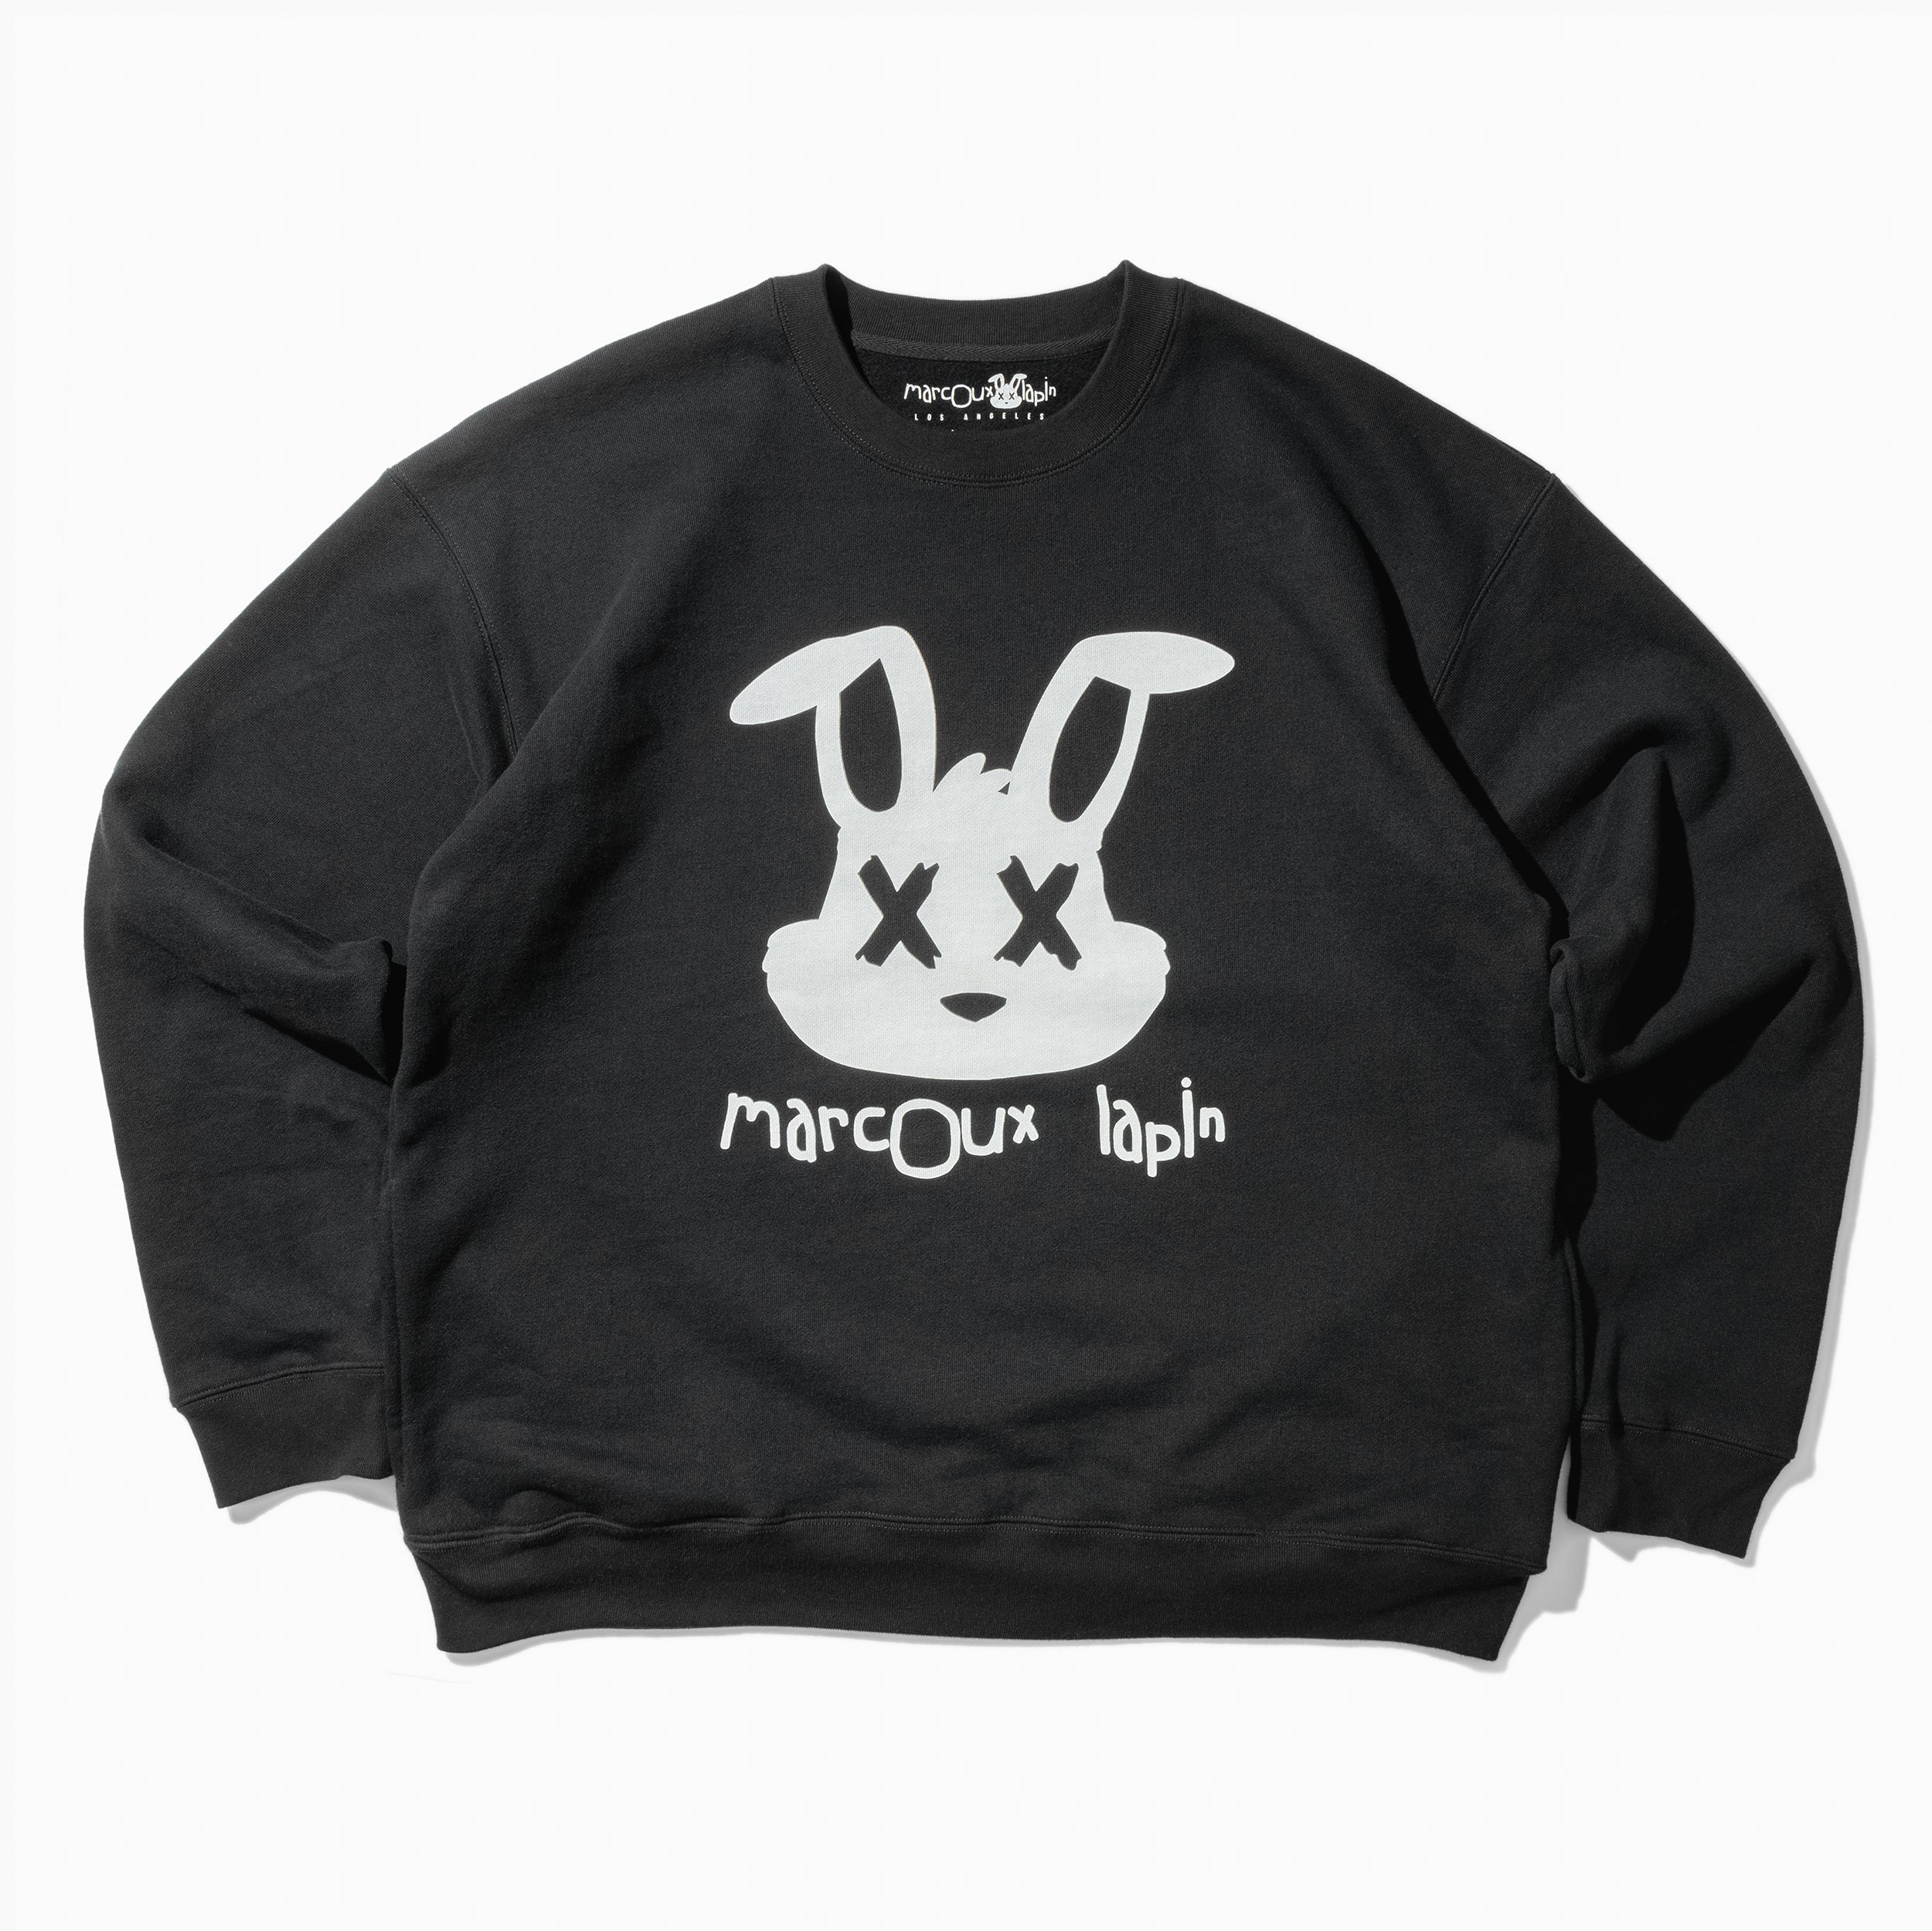 Marcoux Lapin Originals Sweatshirt with side-pockets (Black)